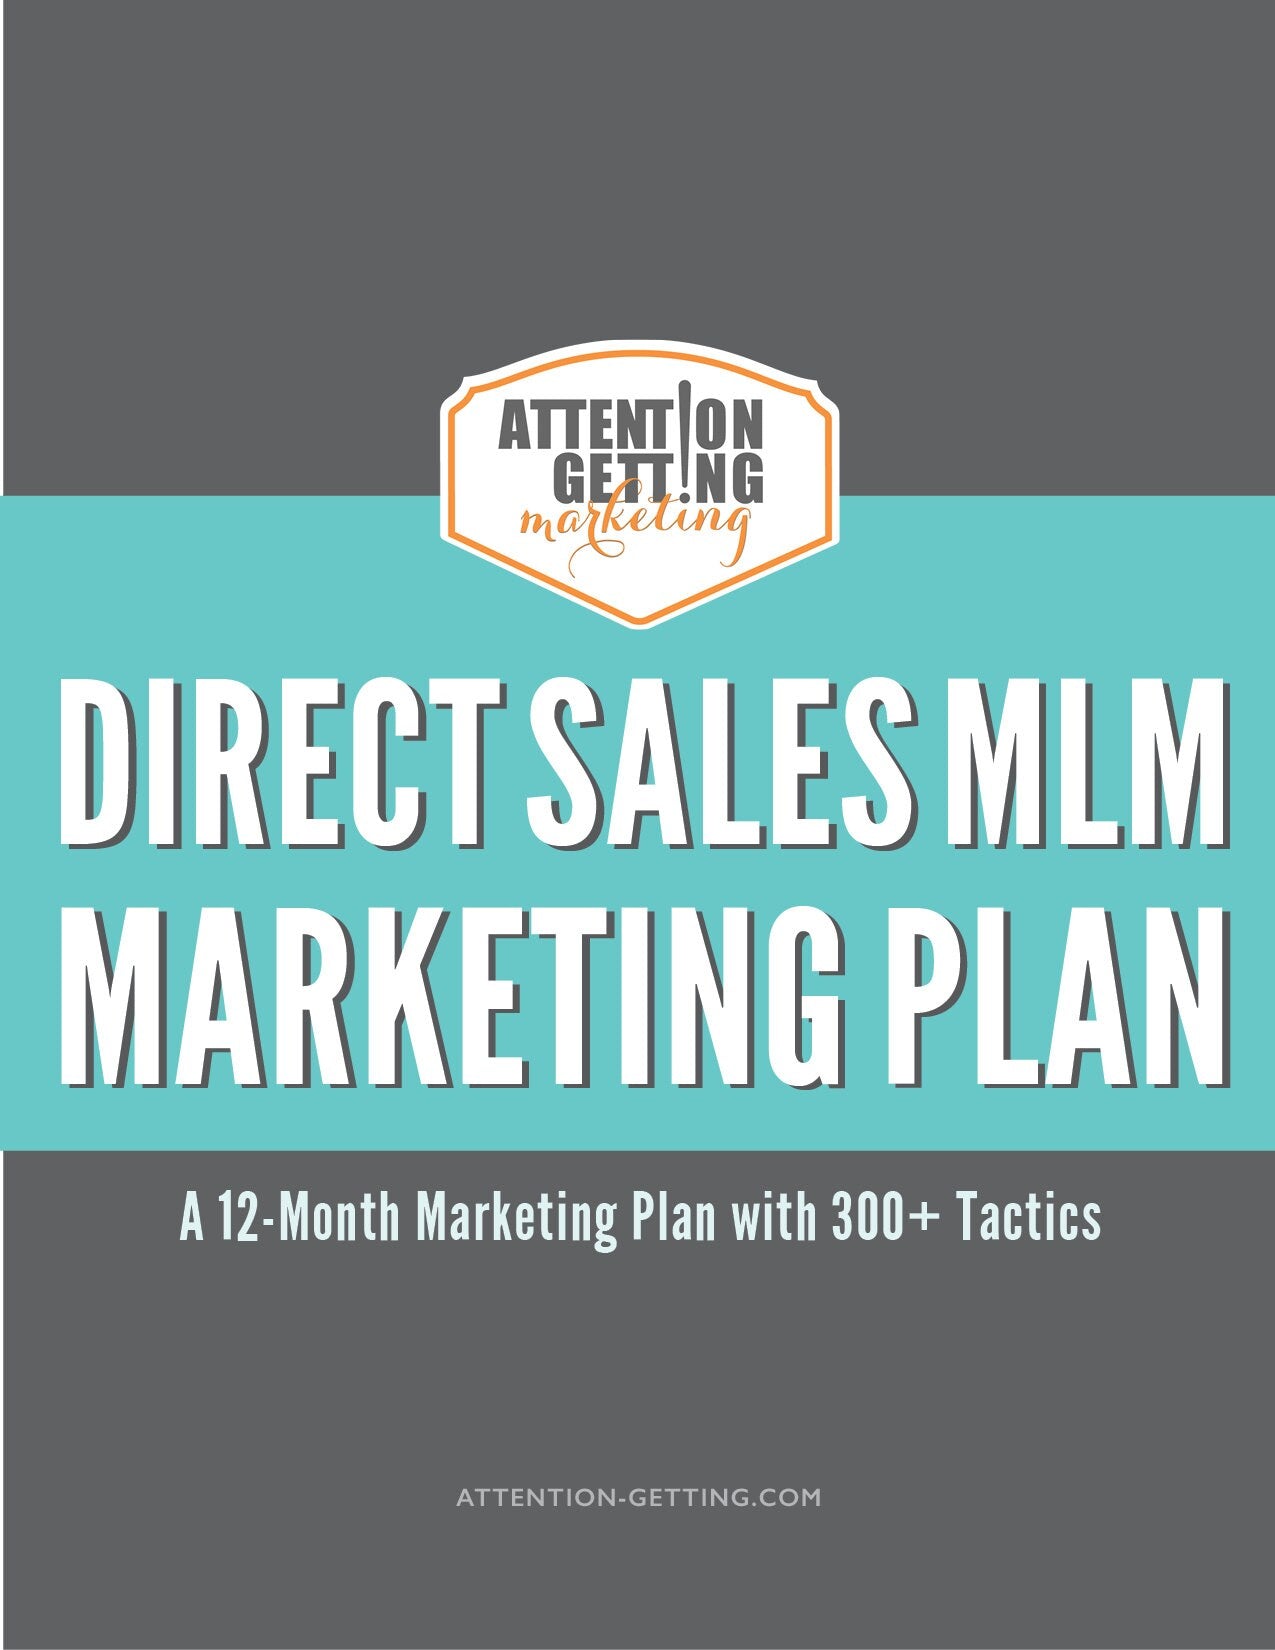 12 month marketing plan for mlm or direct sales businesses such as Scentsy Avon Lulullaroe